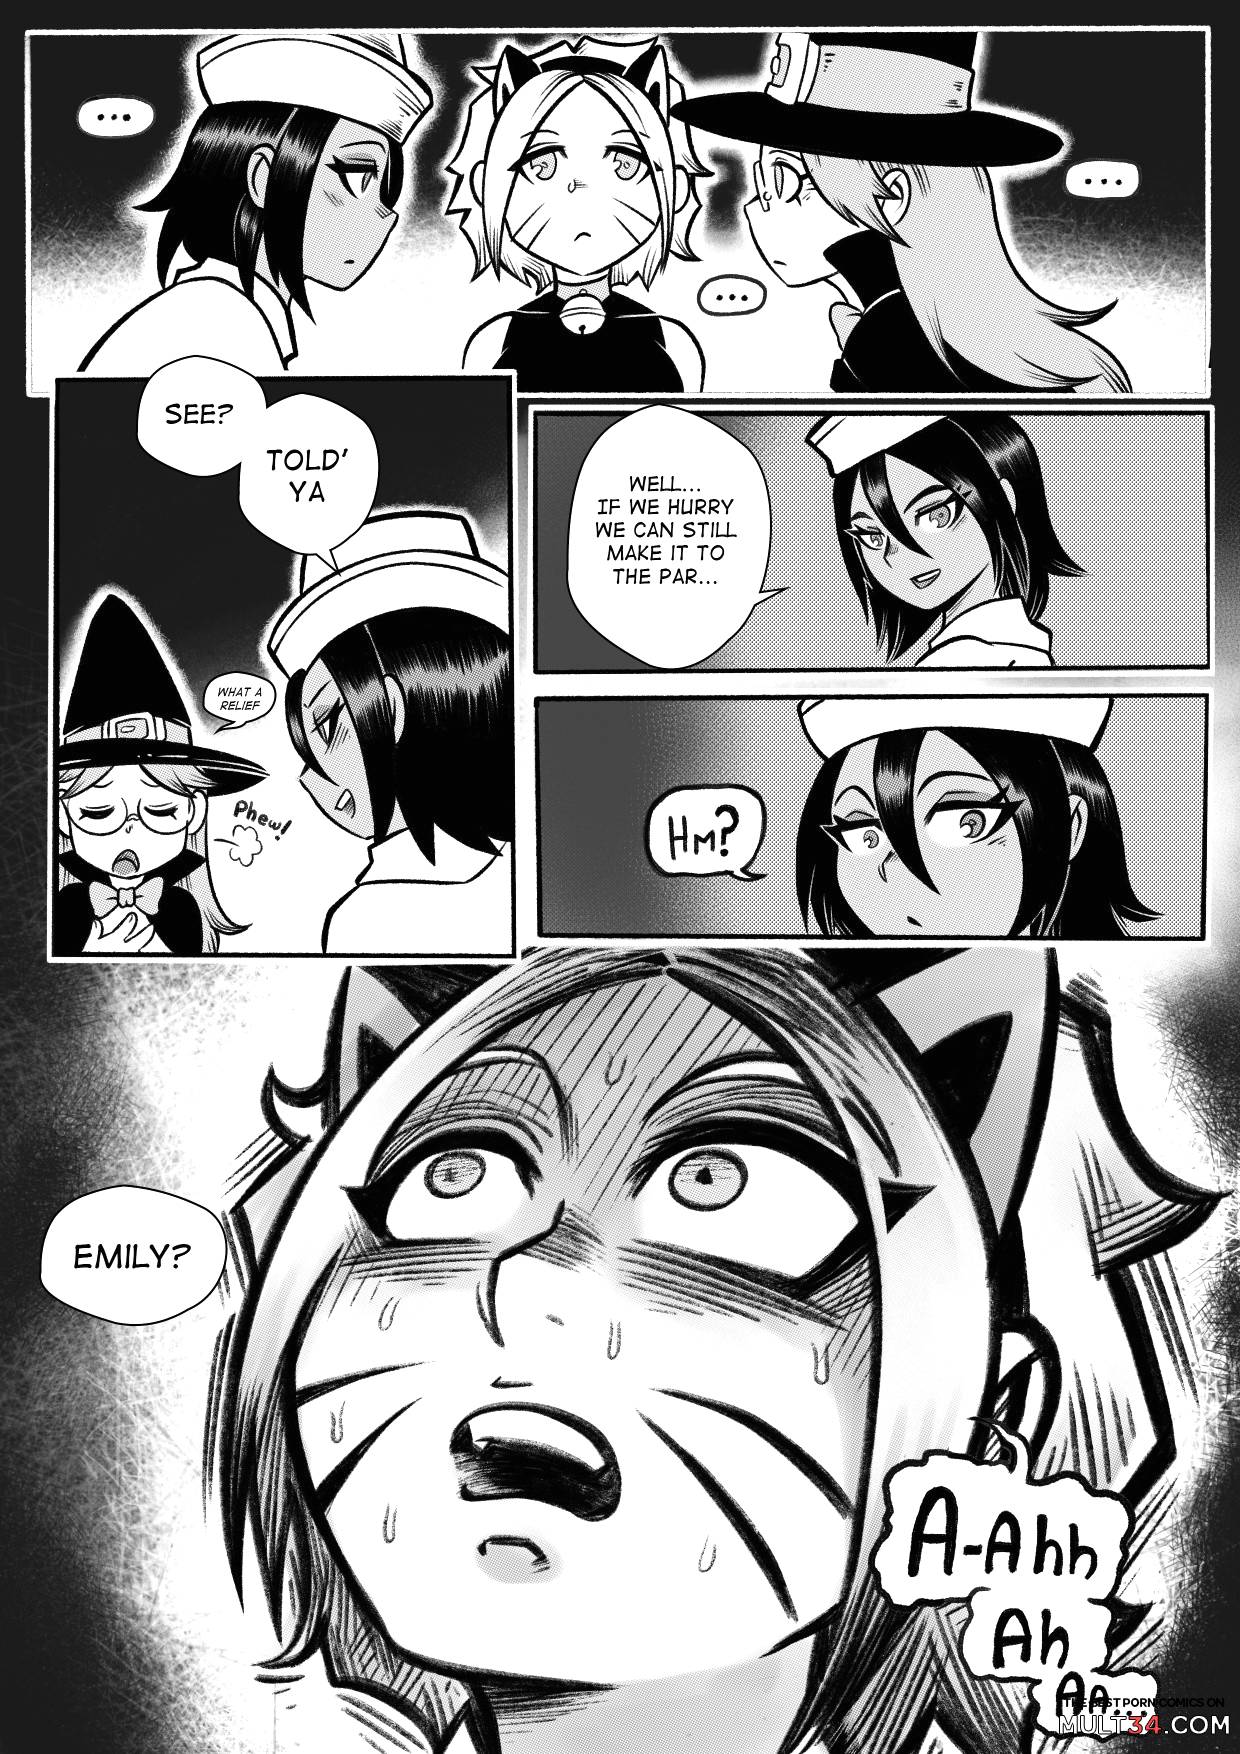 Hereafter - Halloween page 6